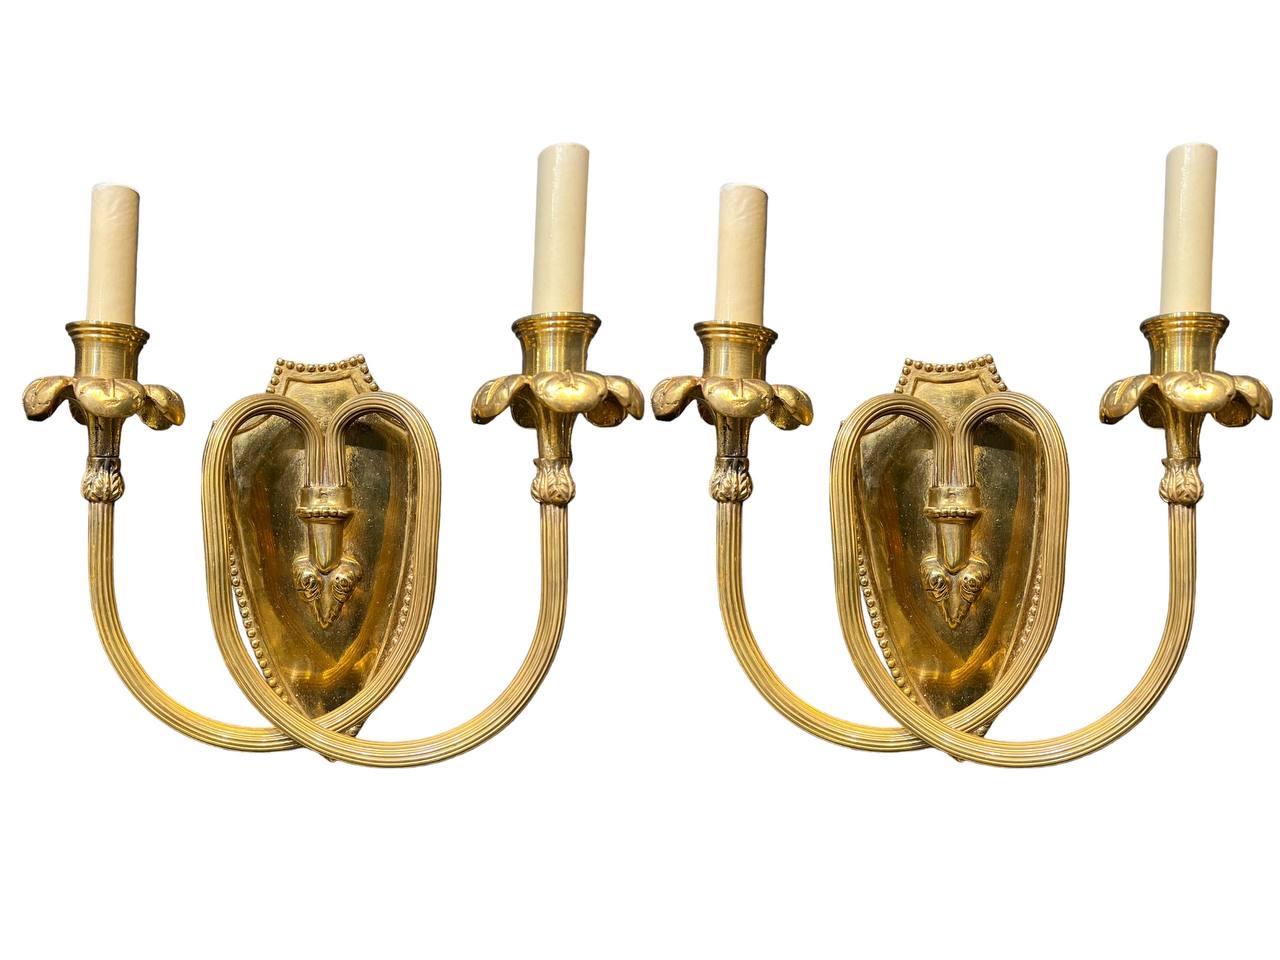 North American 1920’s Caldwell Bronze Sconces with Scrolled Arms For Sale